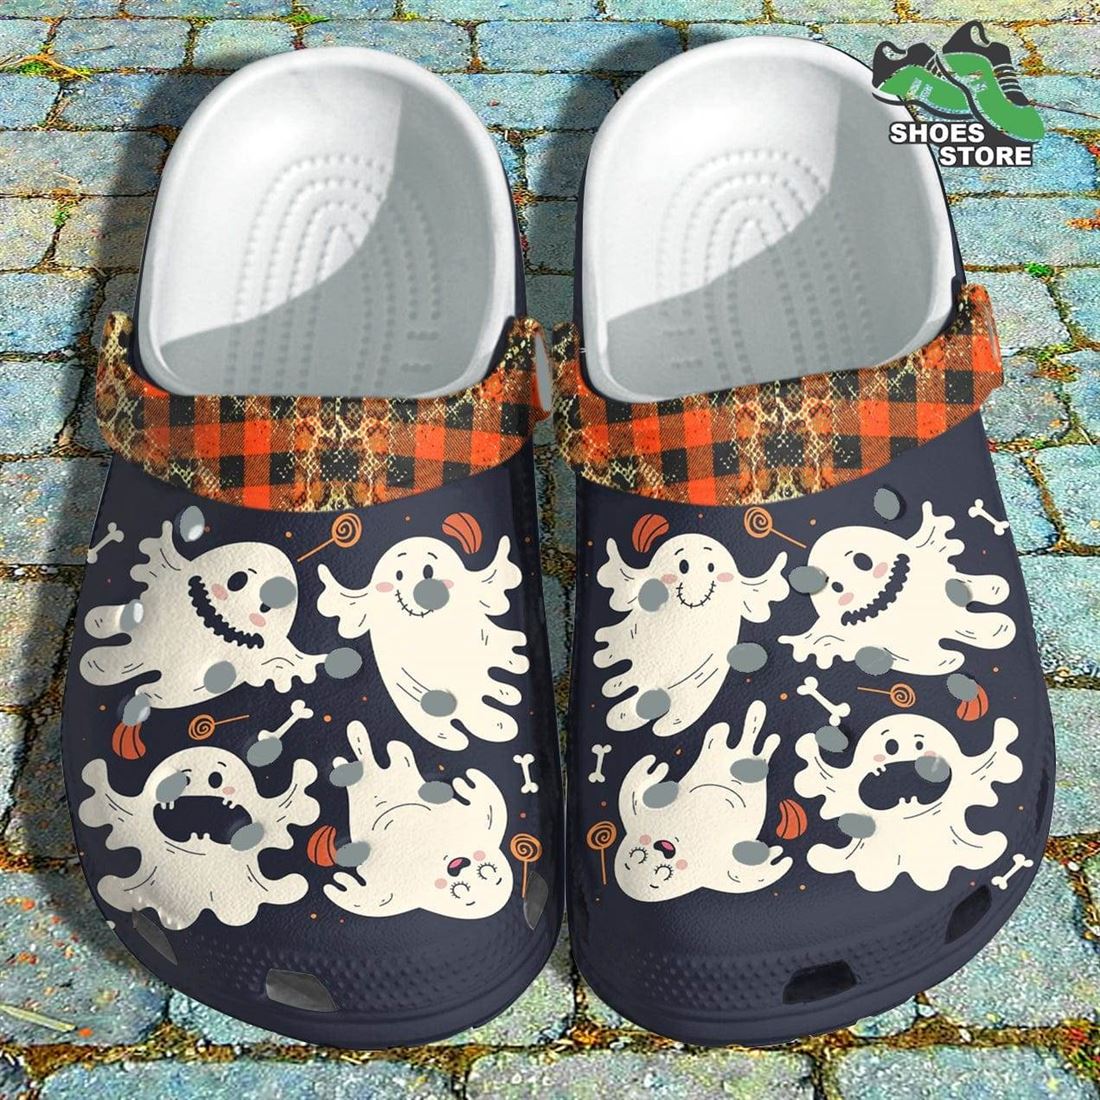 Cute Boo Ghost Dream Crocs Shoes Clogs Ghost Lover Crocs Shoes Halloween